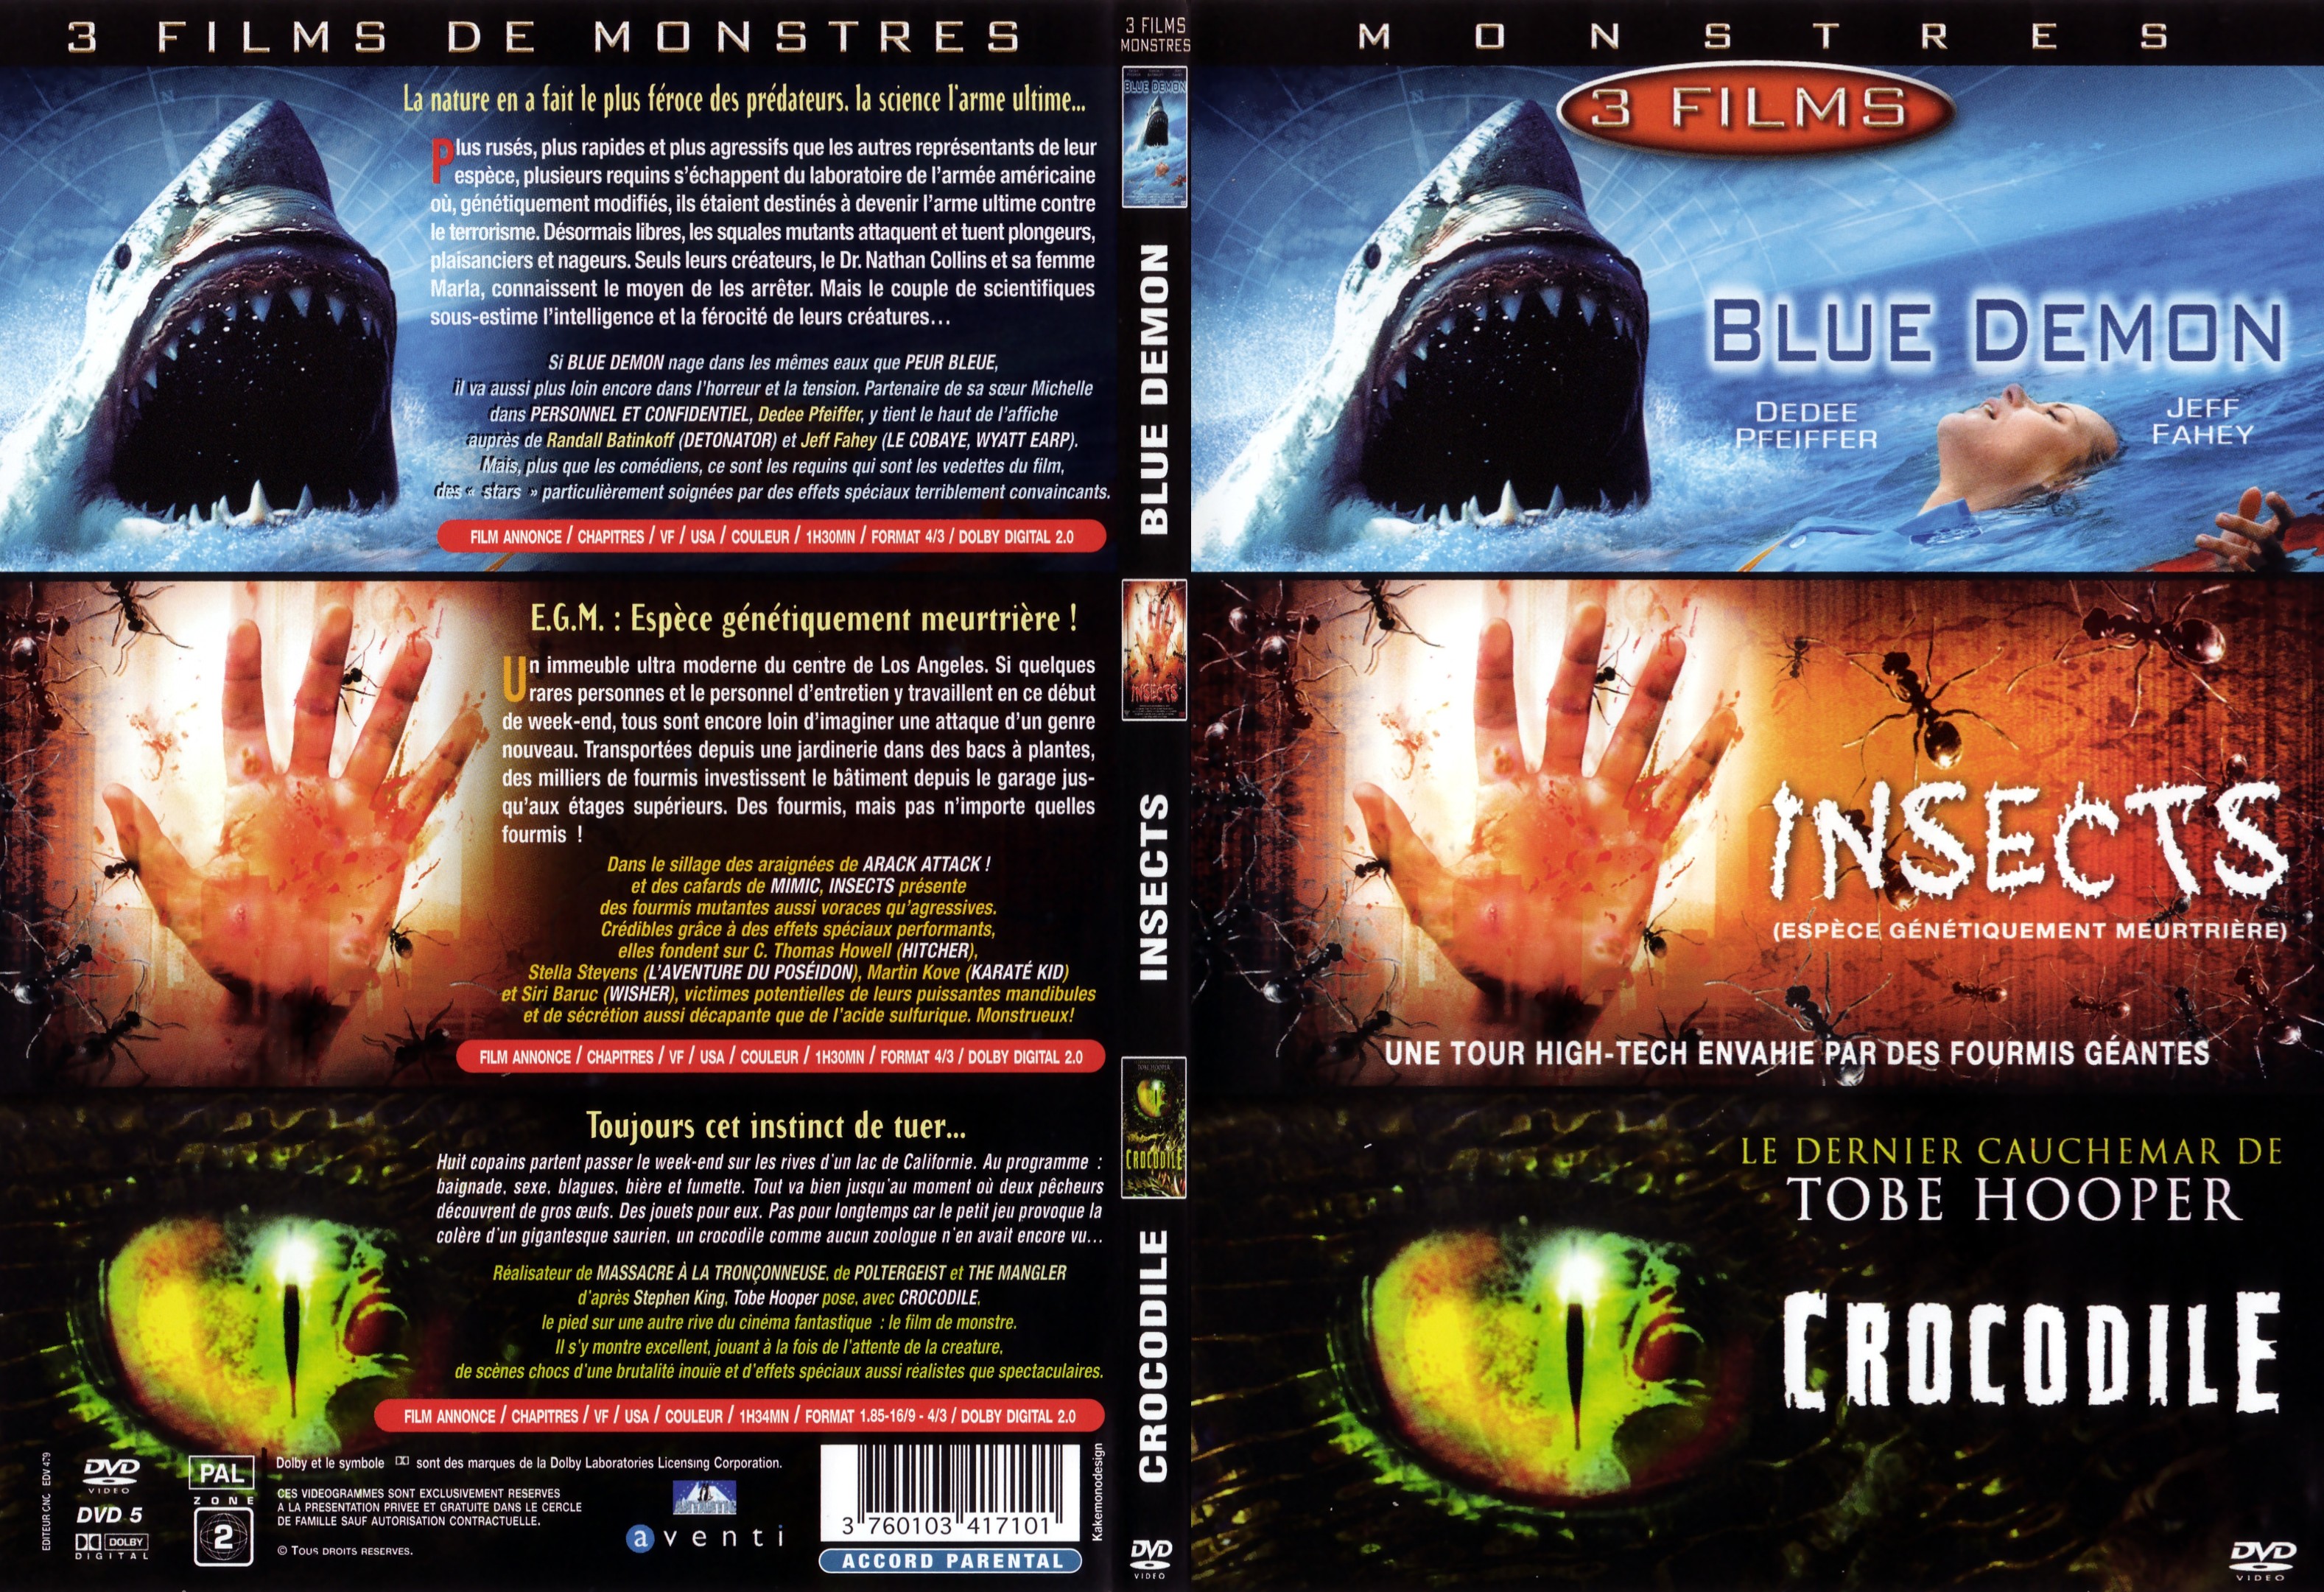 Jaquette DVD Blue demon + Insects + Crocodile - SLIM